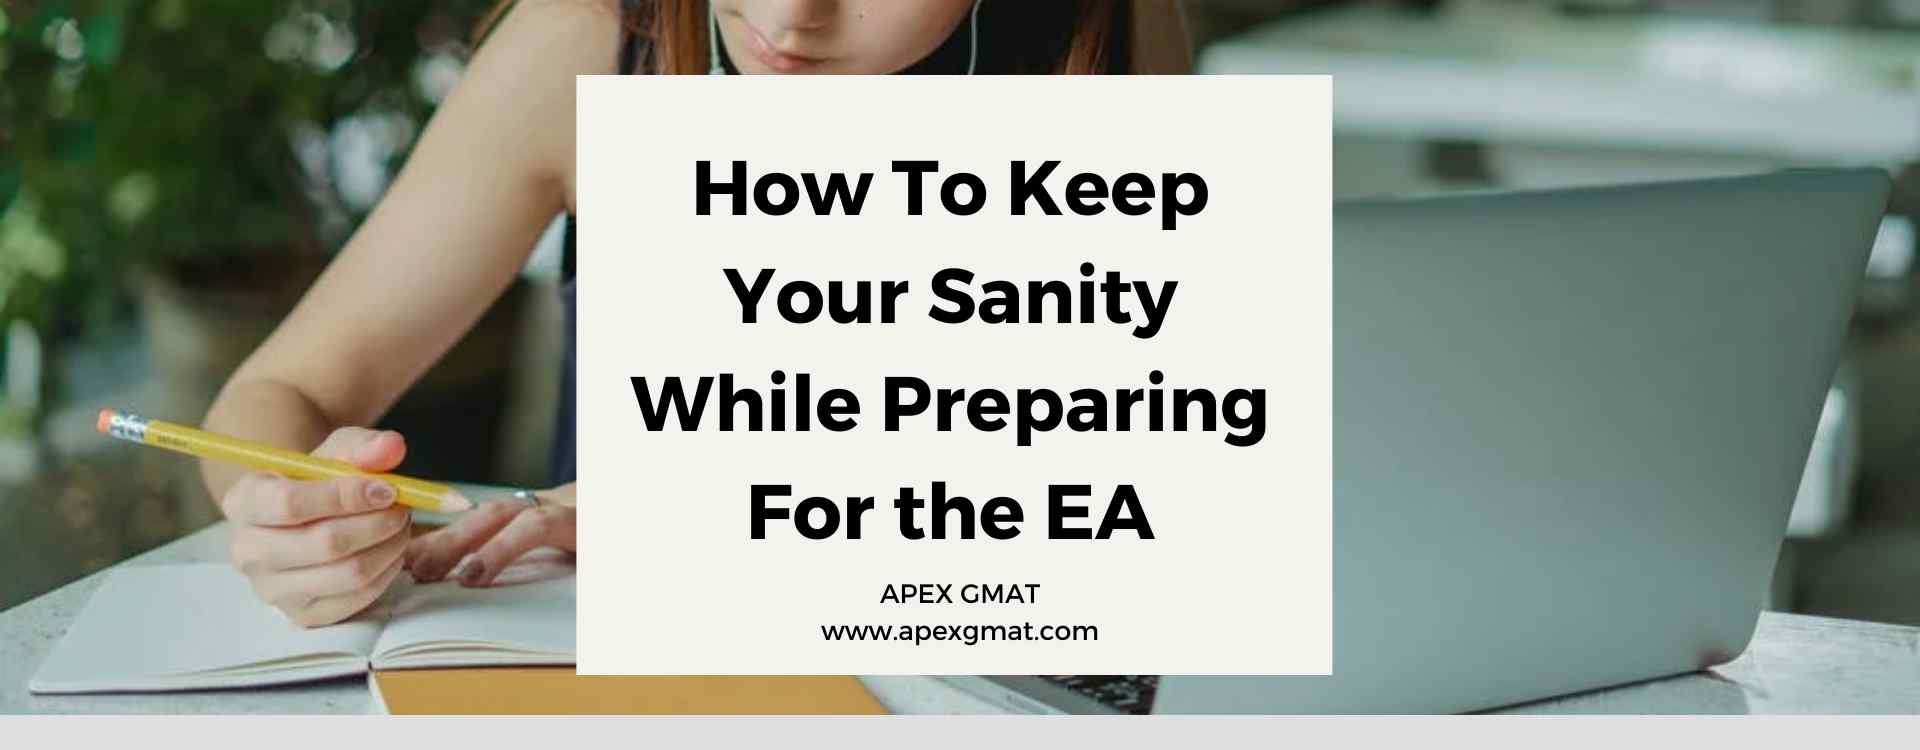 How To Keep Your Sanity While Preparing For The EA